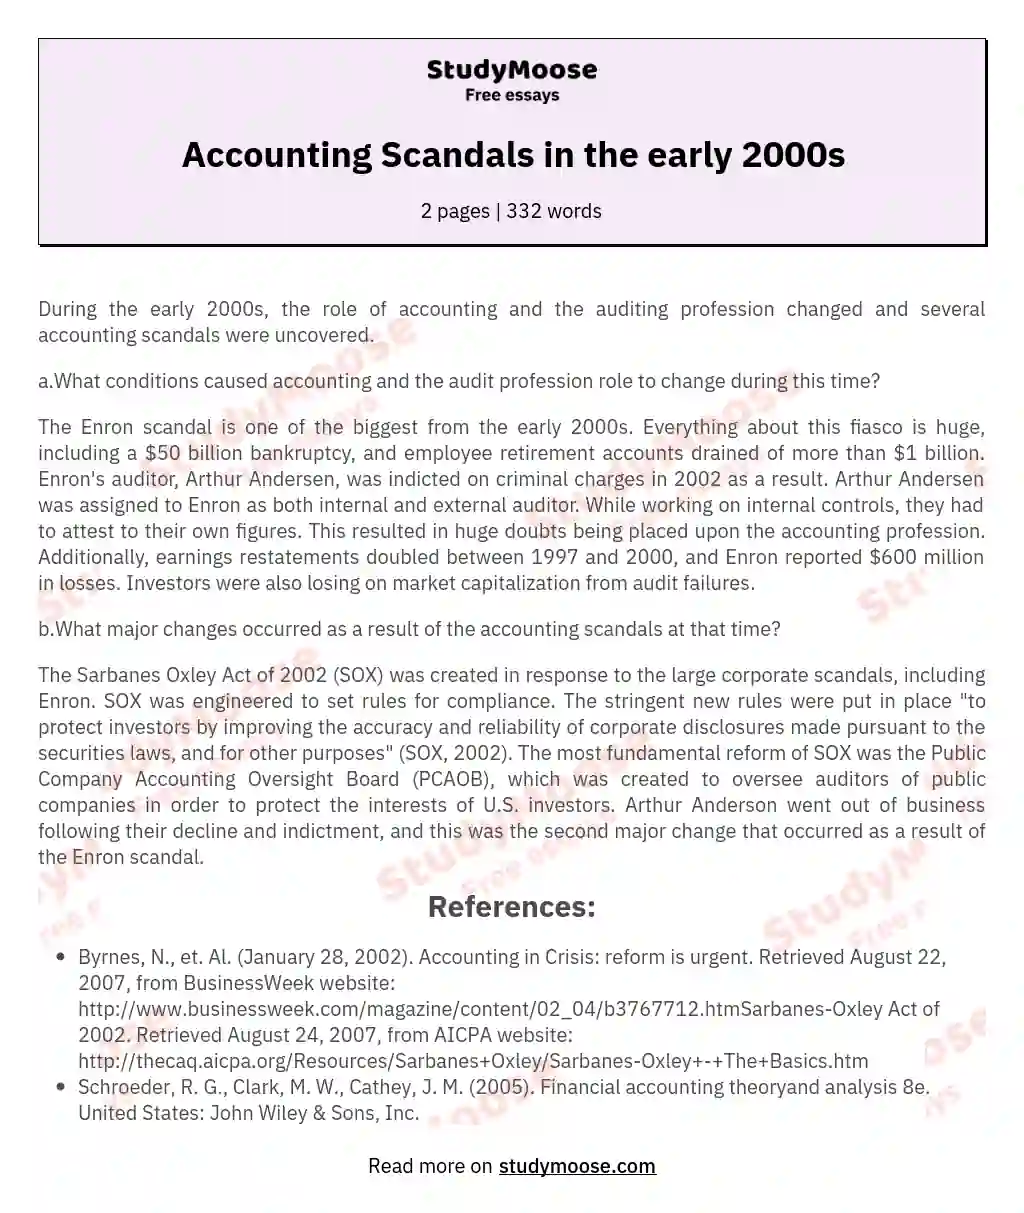 Accounting Scandals in the early 2000s essay